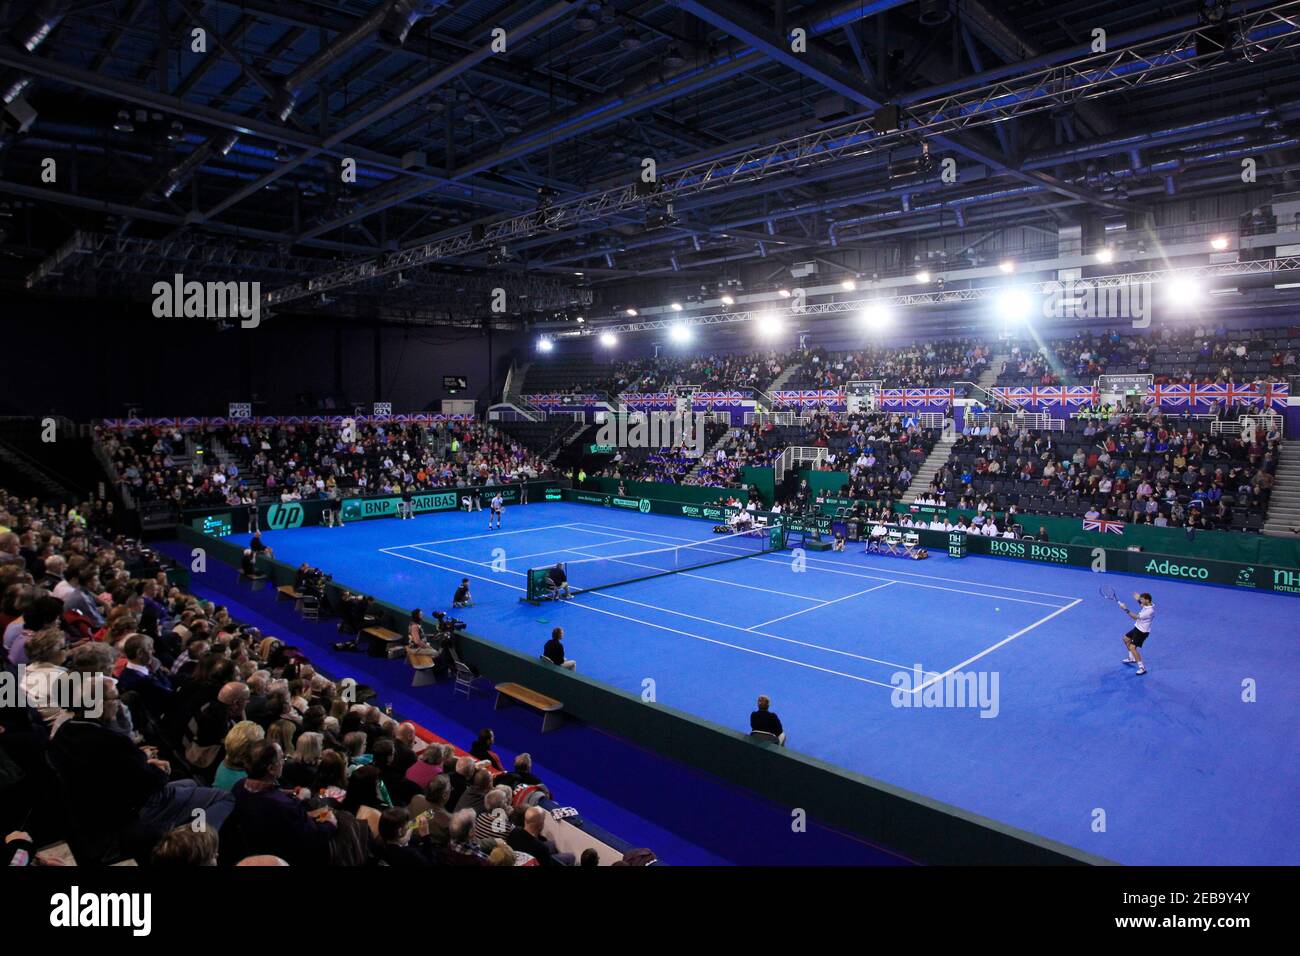 Tennis - Great Britain v Slovakia Davis Cup Europe/Africa Zone Group I  First Round - Braehead Arena, Glasgow, Scotland - 10/2/12 General View  Mandatory Credit: Action Images / Andrew Boyers Stock Photo - Alamy